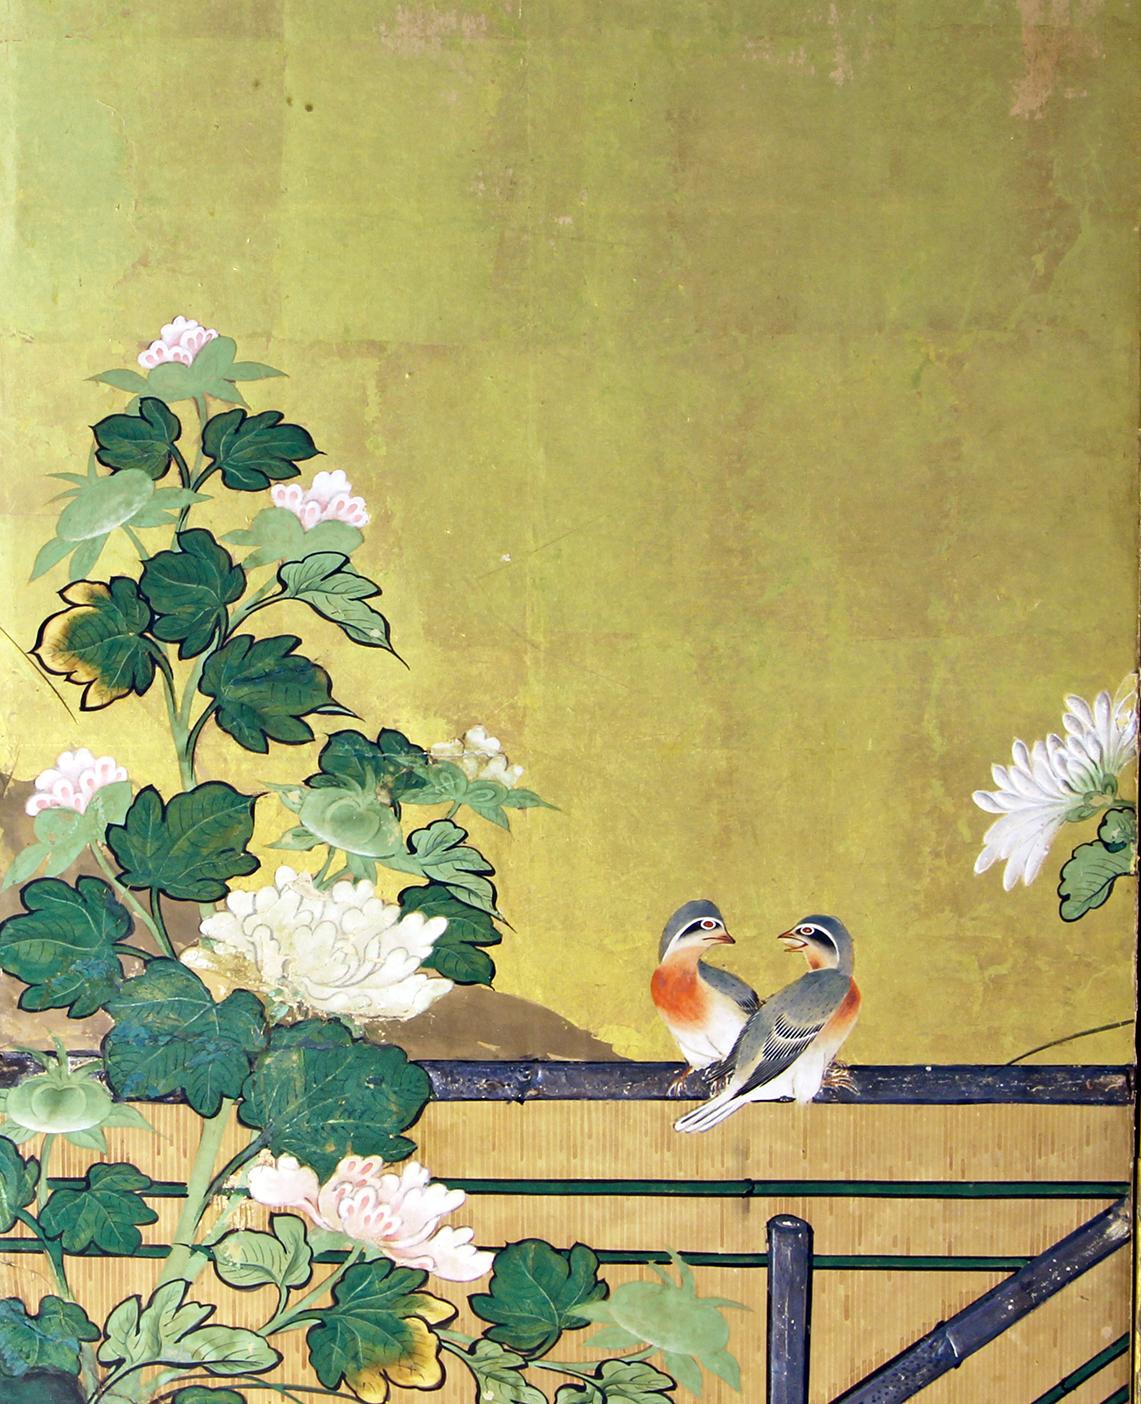 Hand-Painted Edo Period, Early 19th Century Japanese Folding Screen by Rinpa School